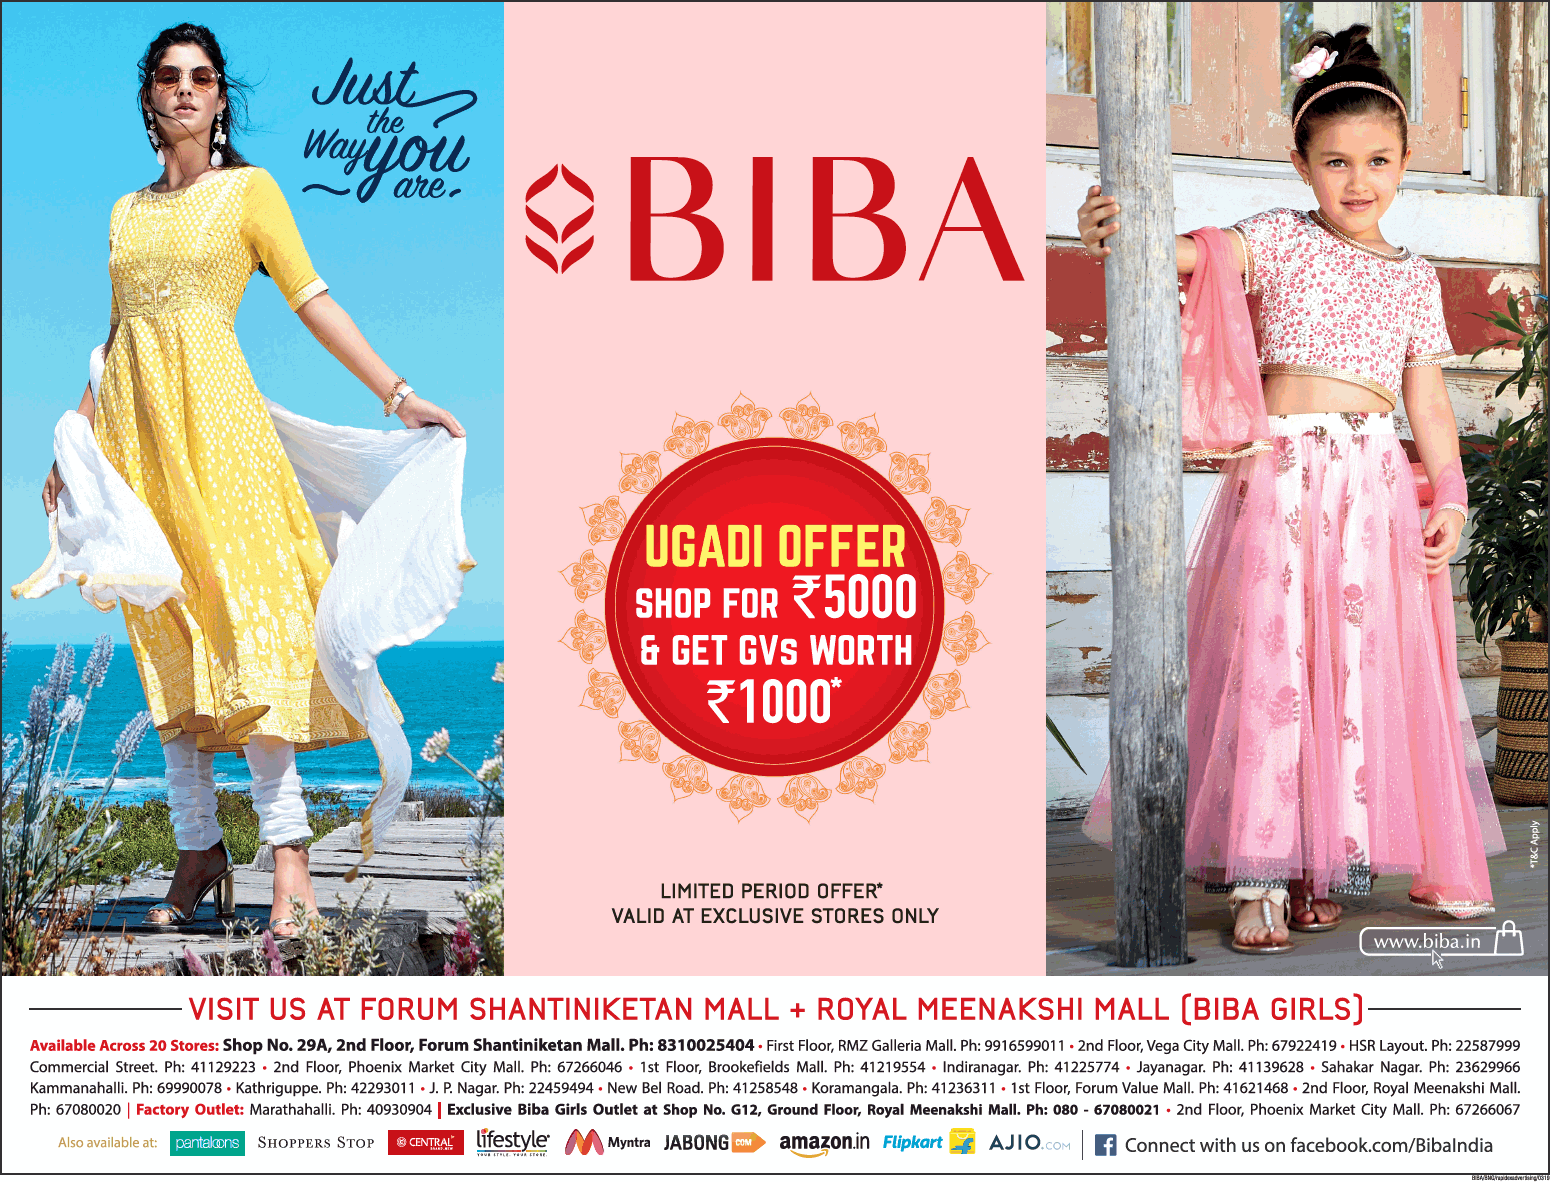 biba-clothing-ugadi-offer-shop-for-rs-5000-and-get-worth-rs-1000-ad-times-of-india-bangalore-29-03-2019.png